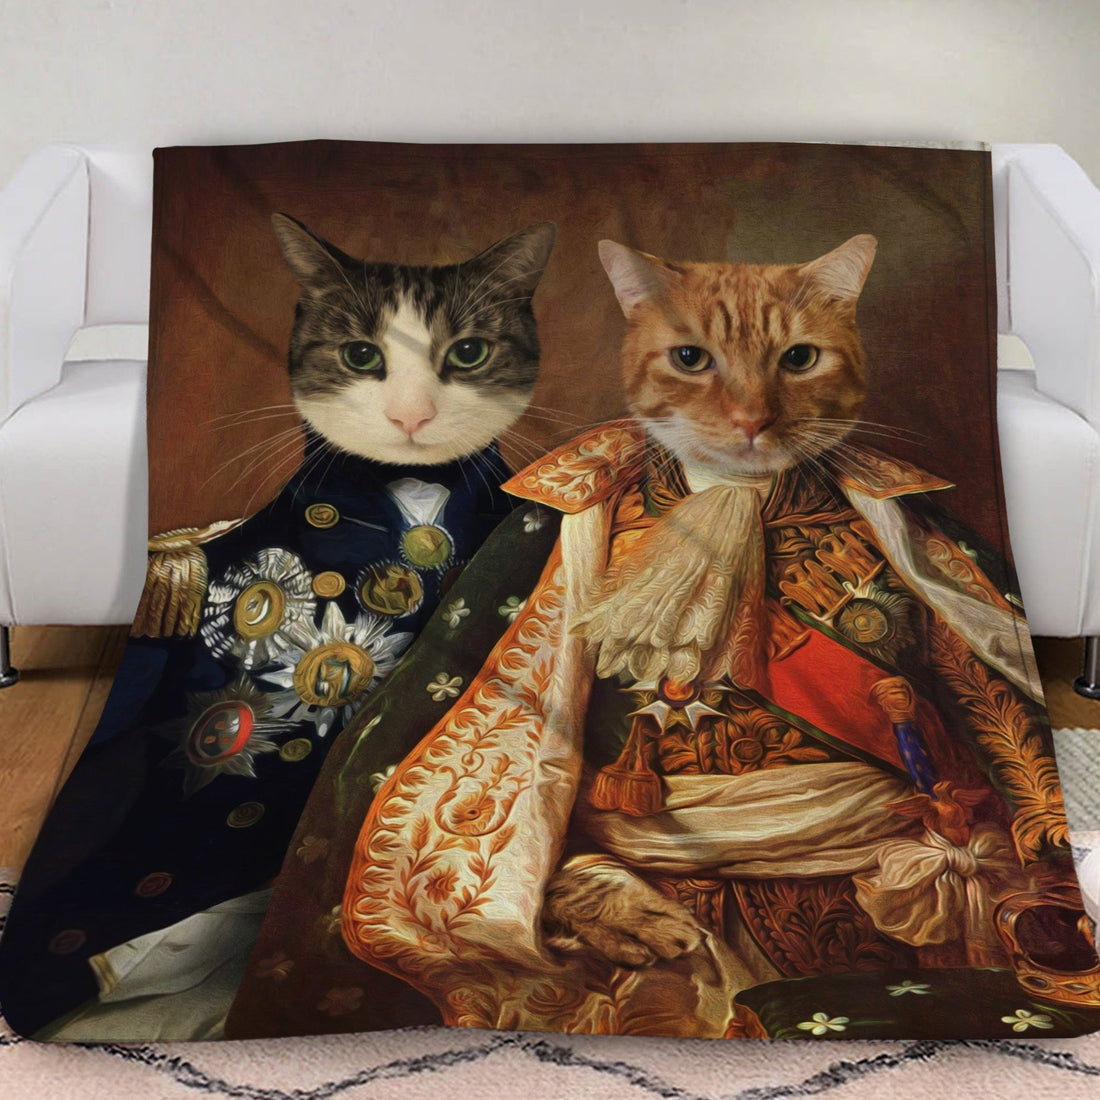 Customized Gifts That Will Accommodate The Unique Preferences’ Of That Cat-loving Friends.